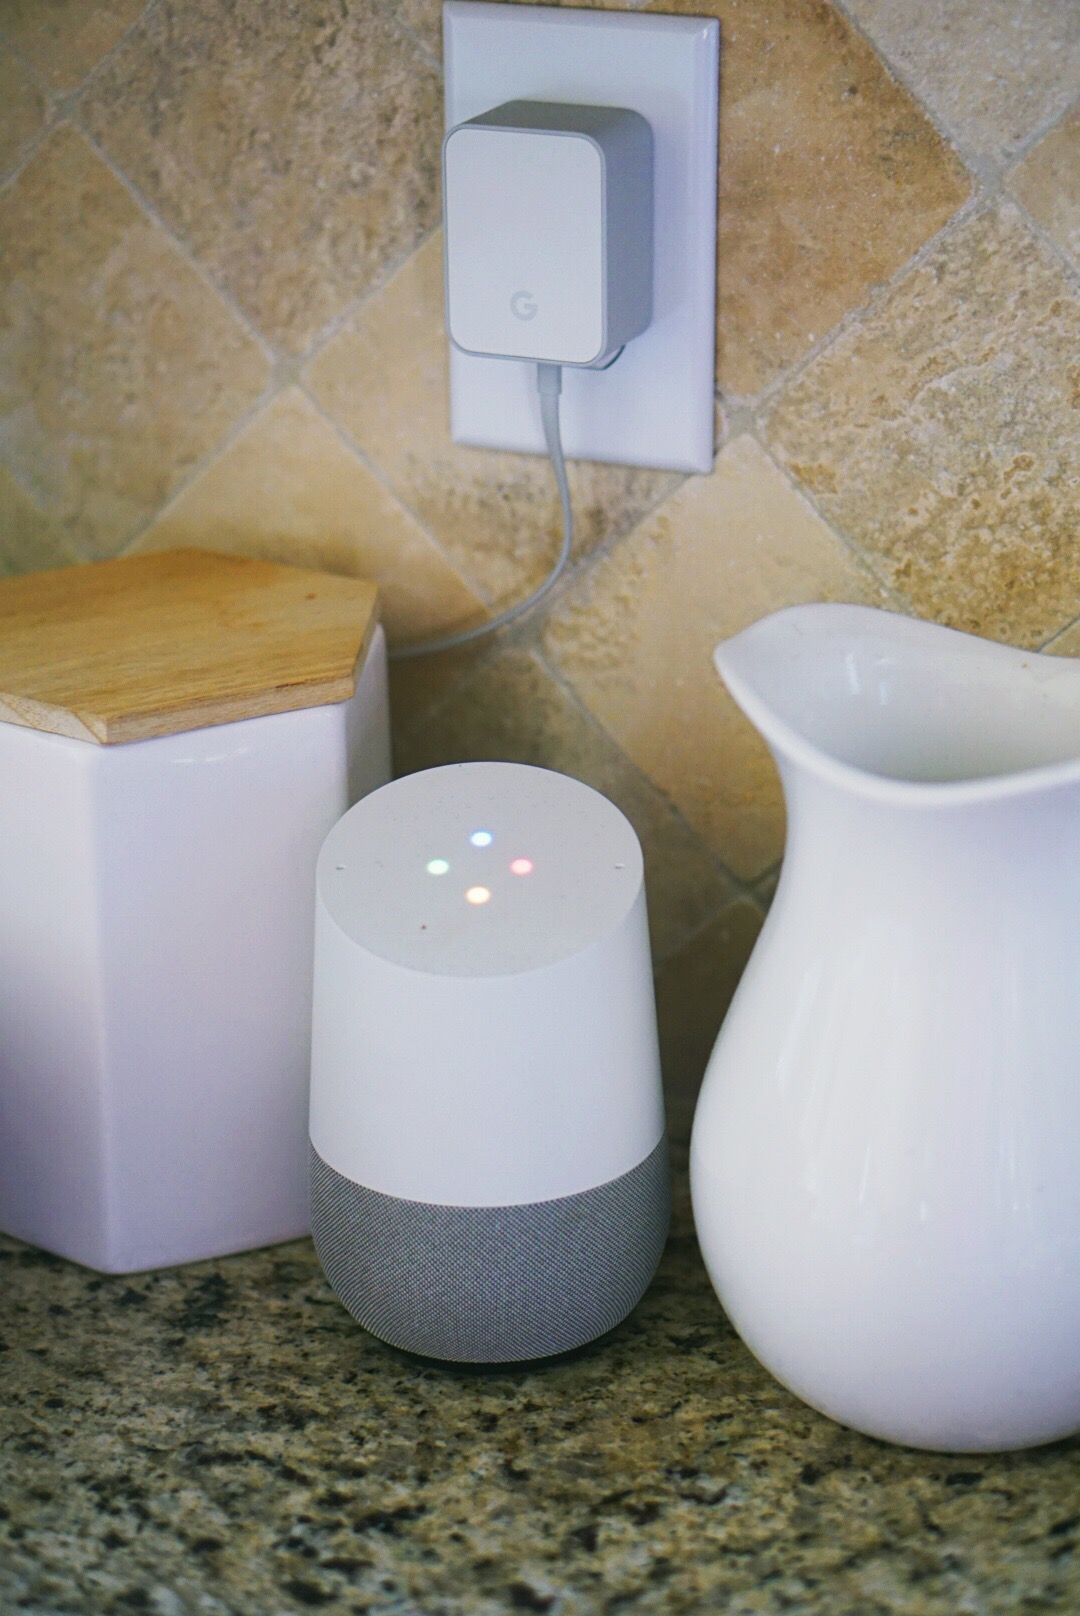 Kitchen Essentials - Google Home Speaker - You Can Shop For no eBay - ebay home goods via Misty Nelson, lifestyle blogger ad parenting influencer mom at frostedblog @frostedevents 